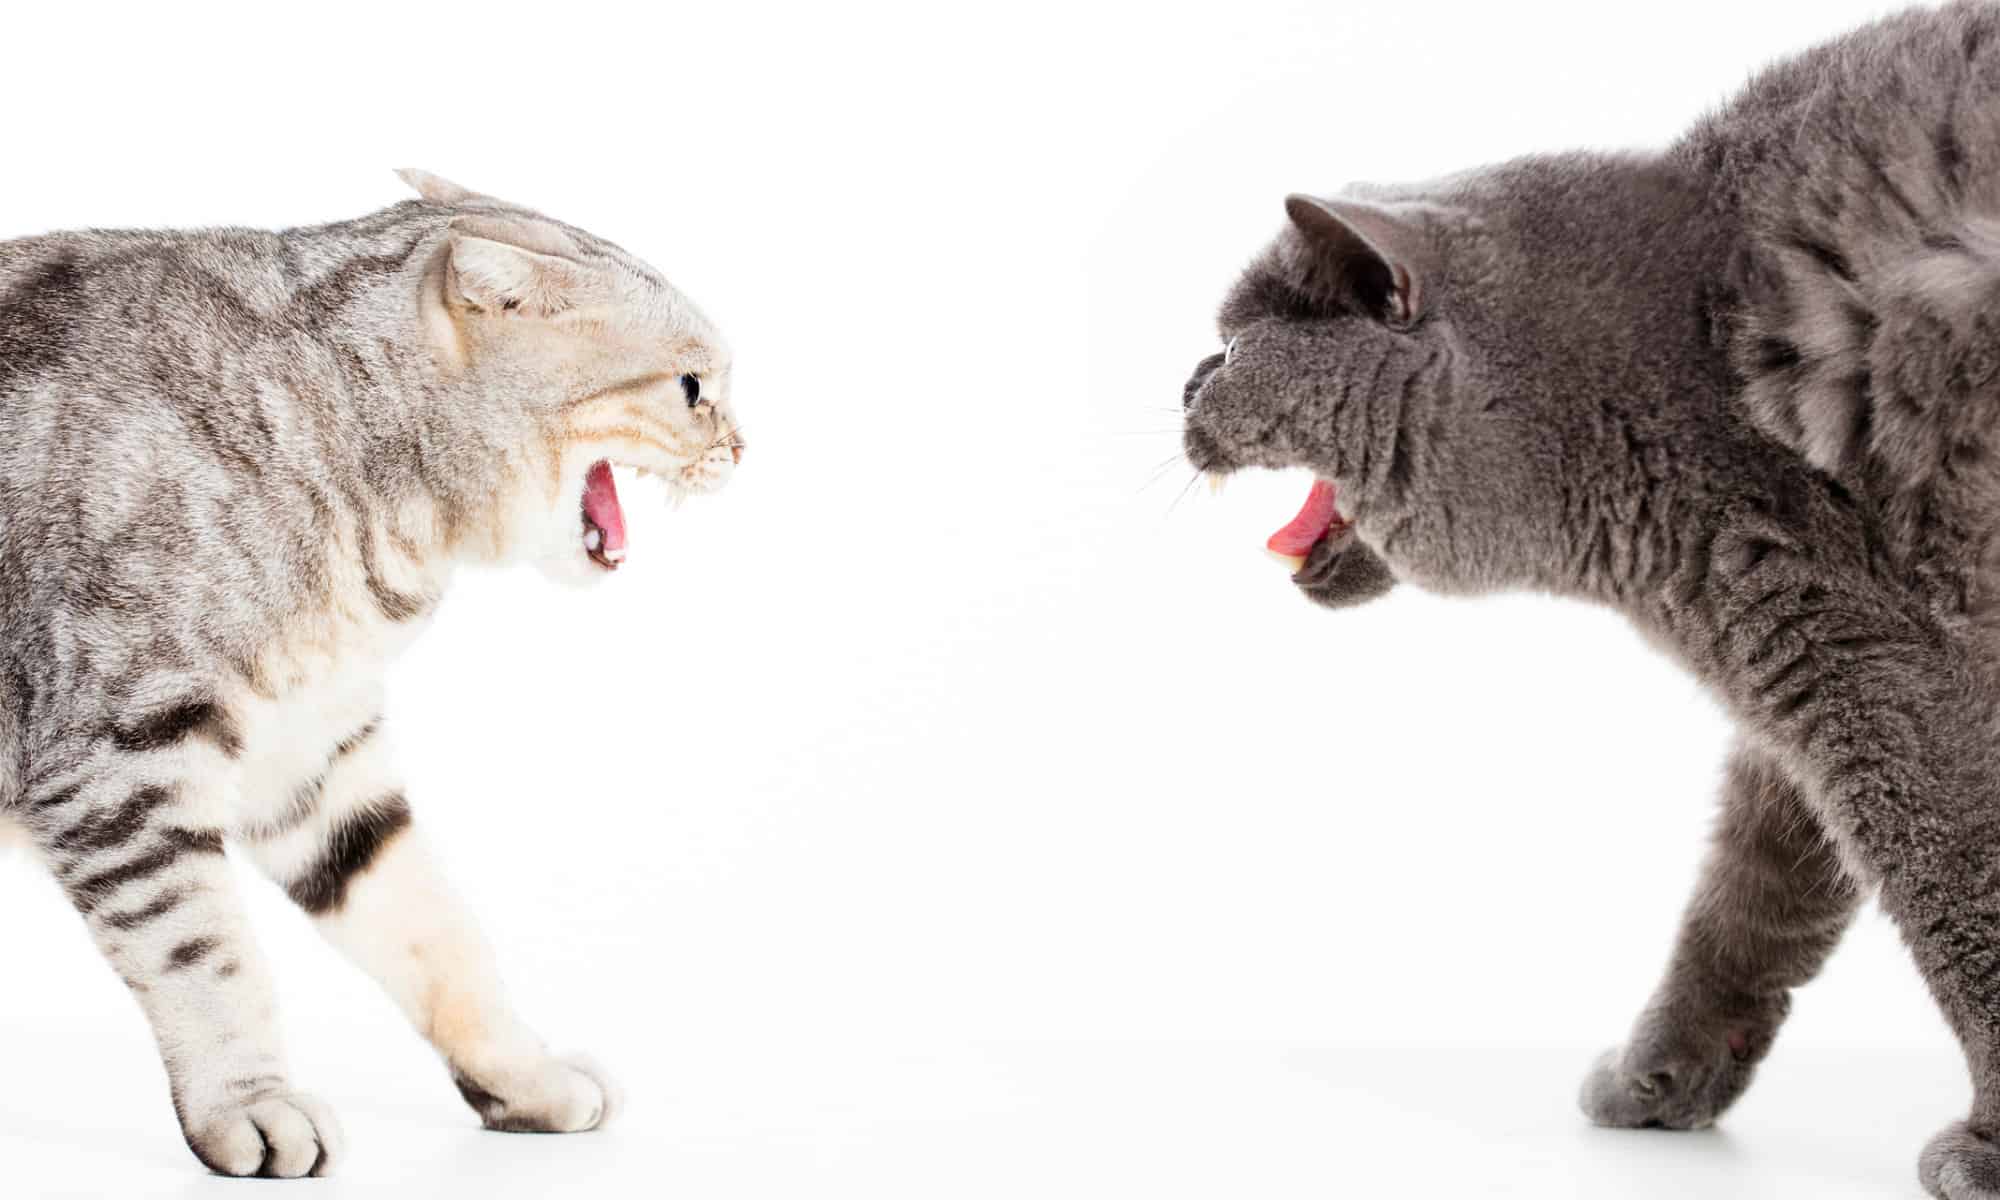 Two cats screaming at each other on a white background